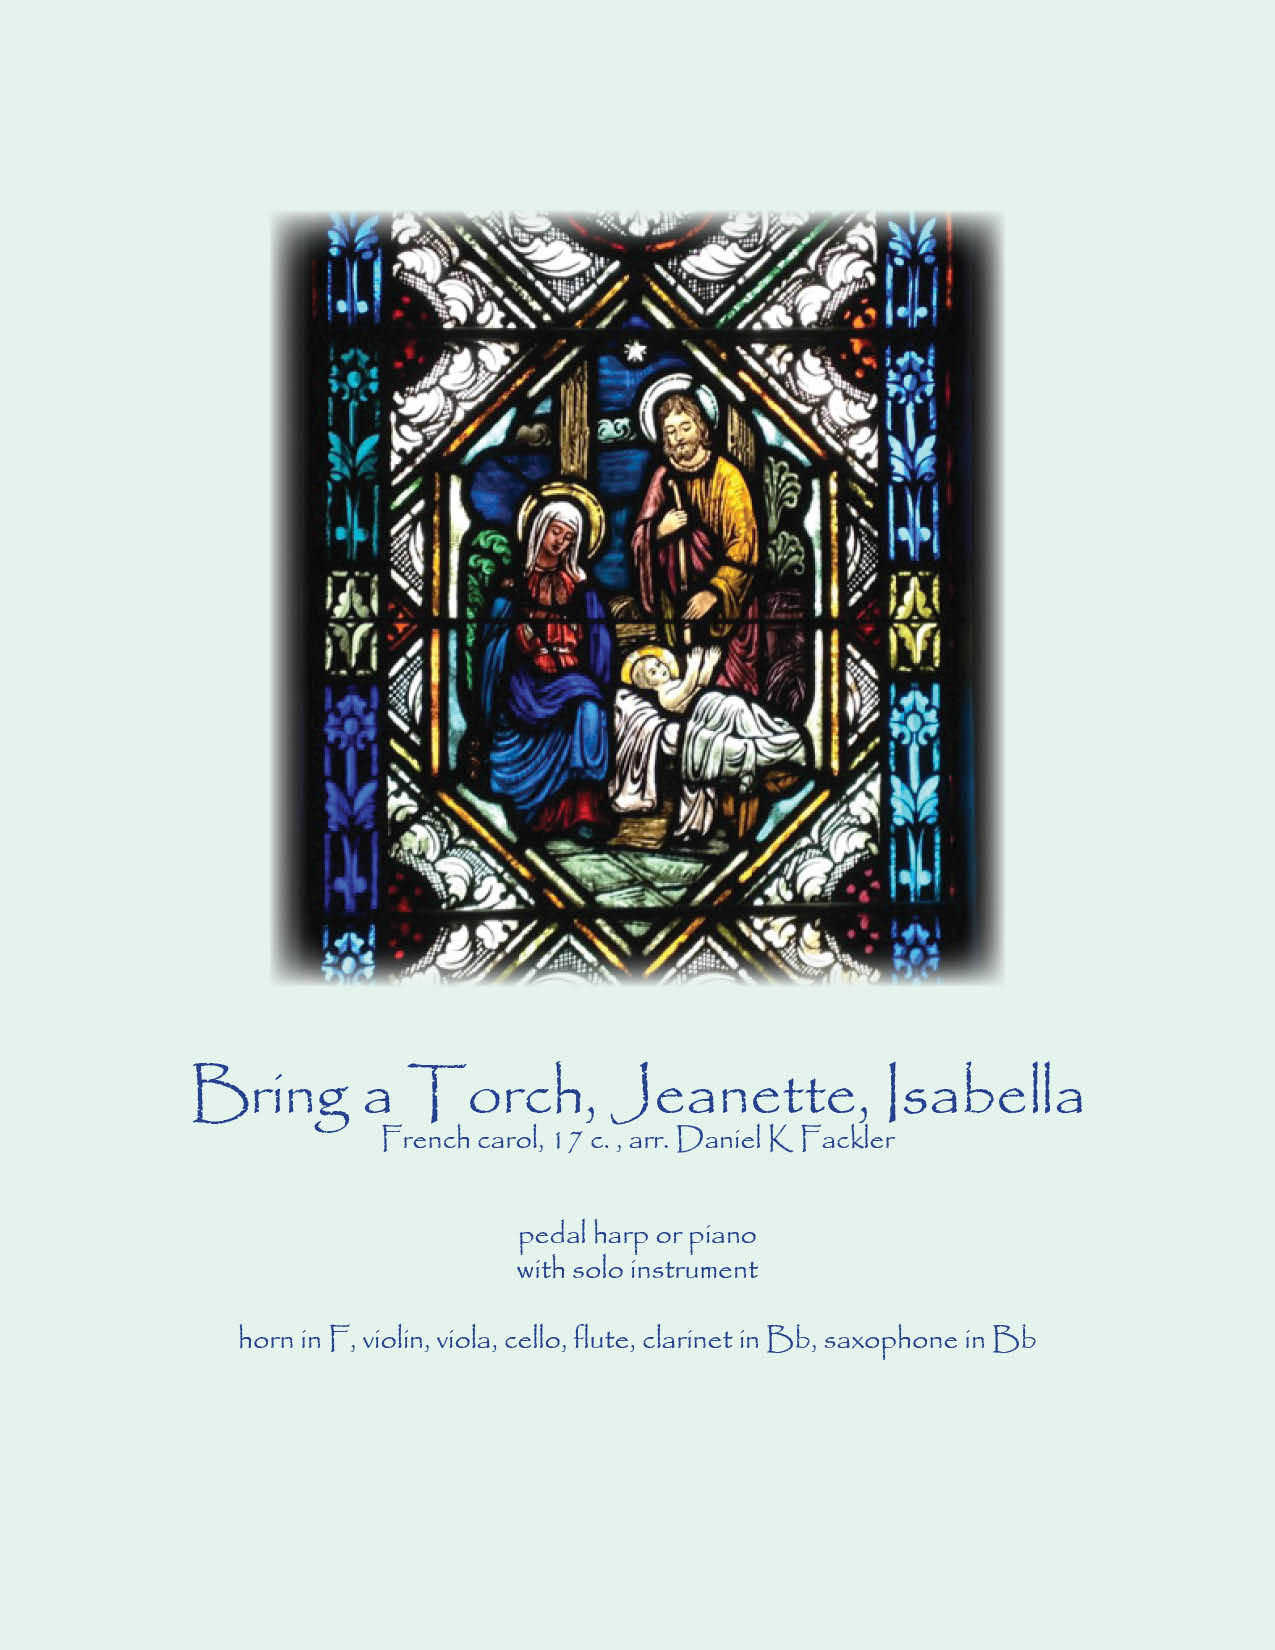 French carol: Bring a Torch, Jeanette, Isabella -  sheet music ~  solo string instrument or harp